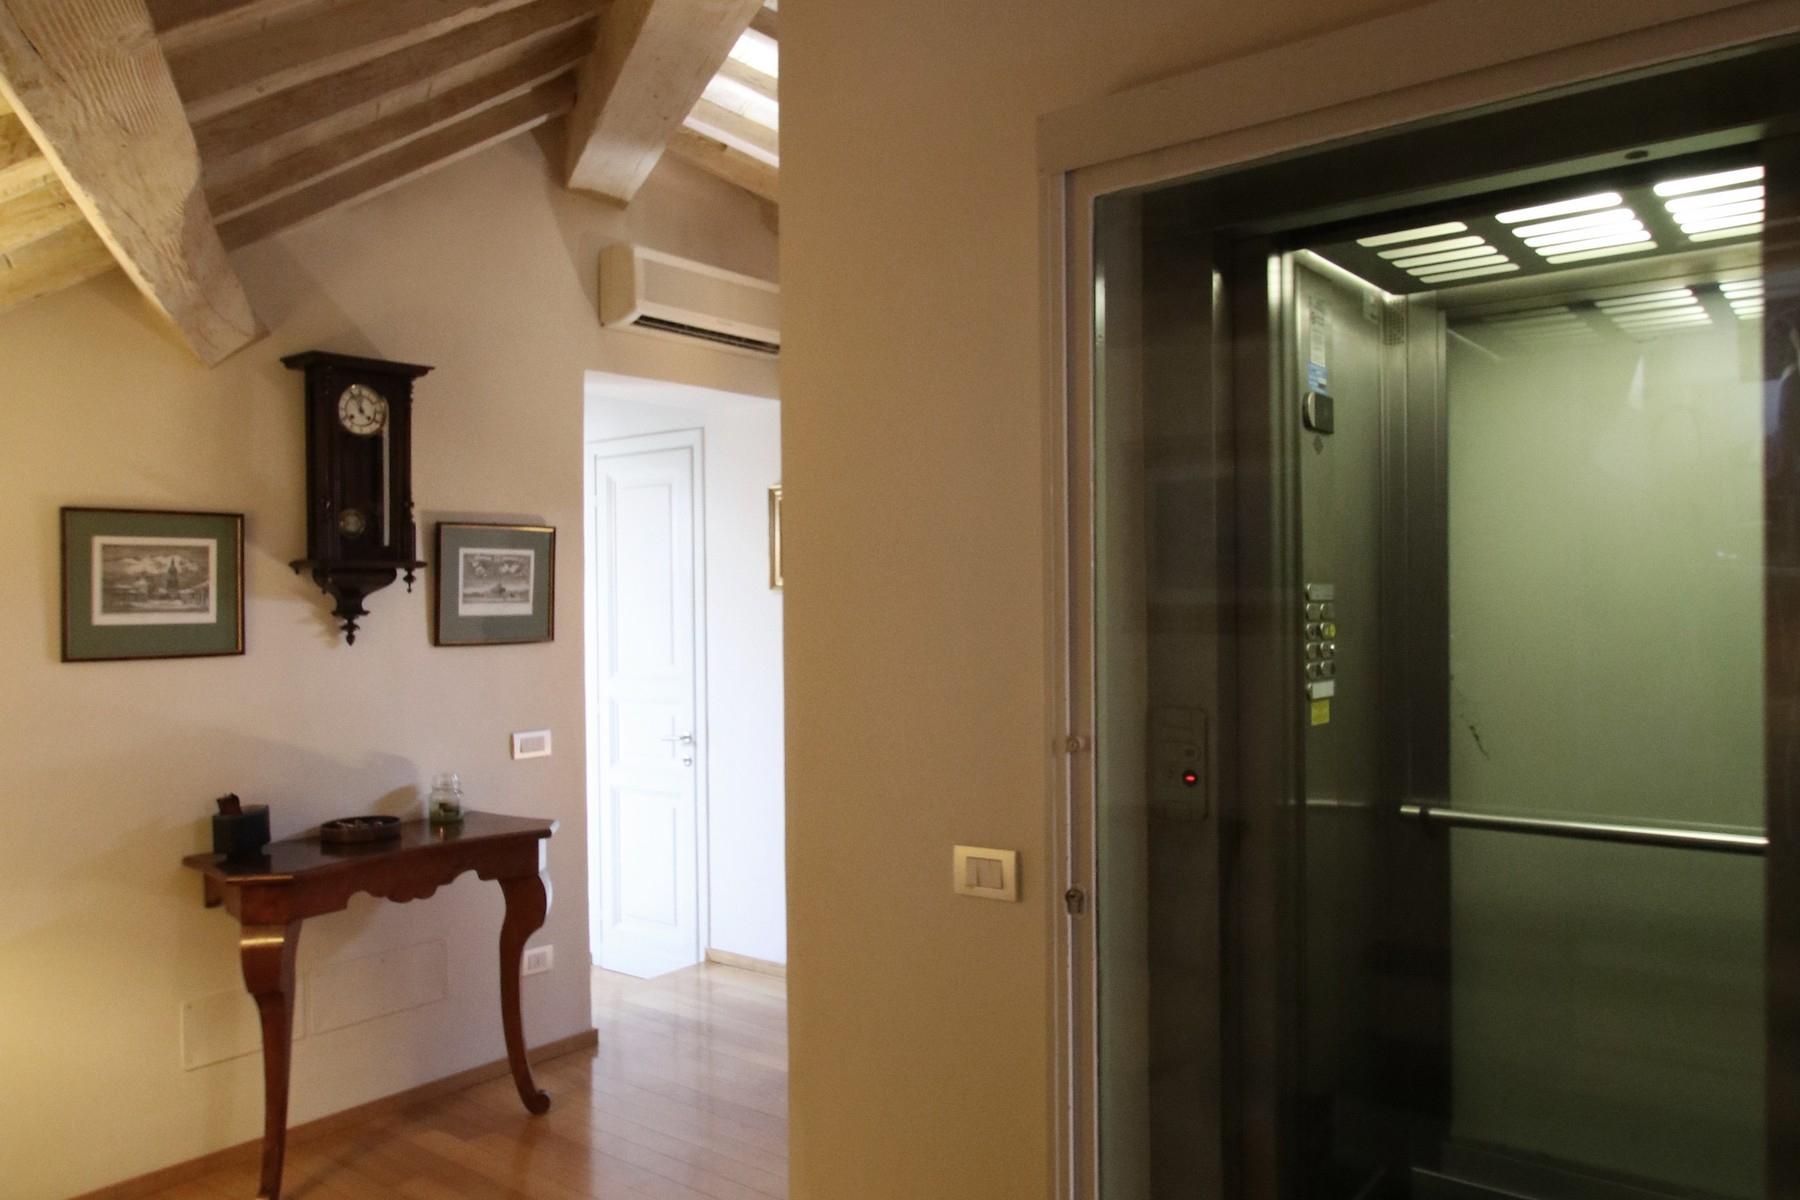 Flamboyant Top-floor Apartment with Tower in Bellosguardo, Florence - 12